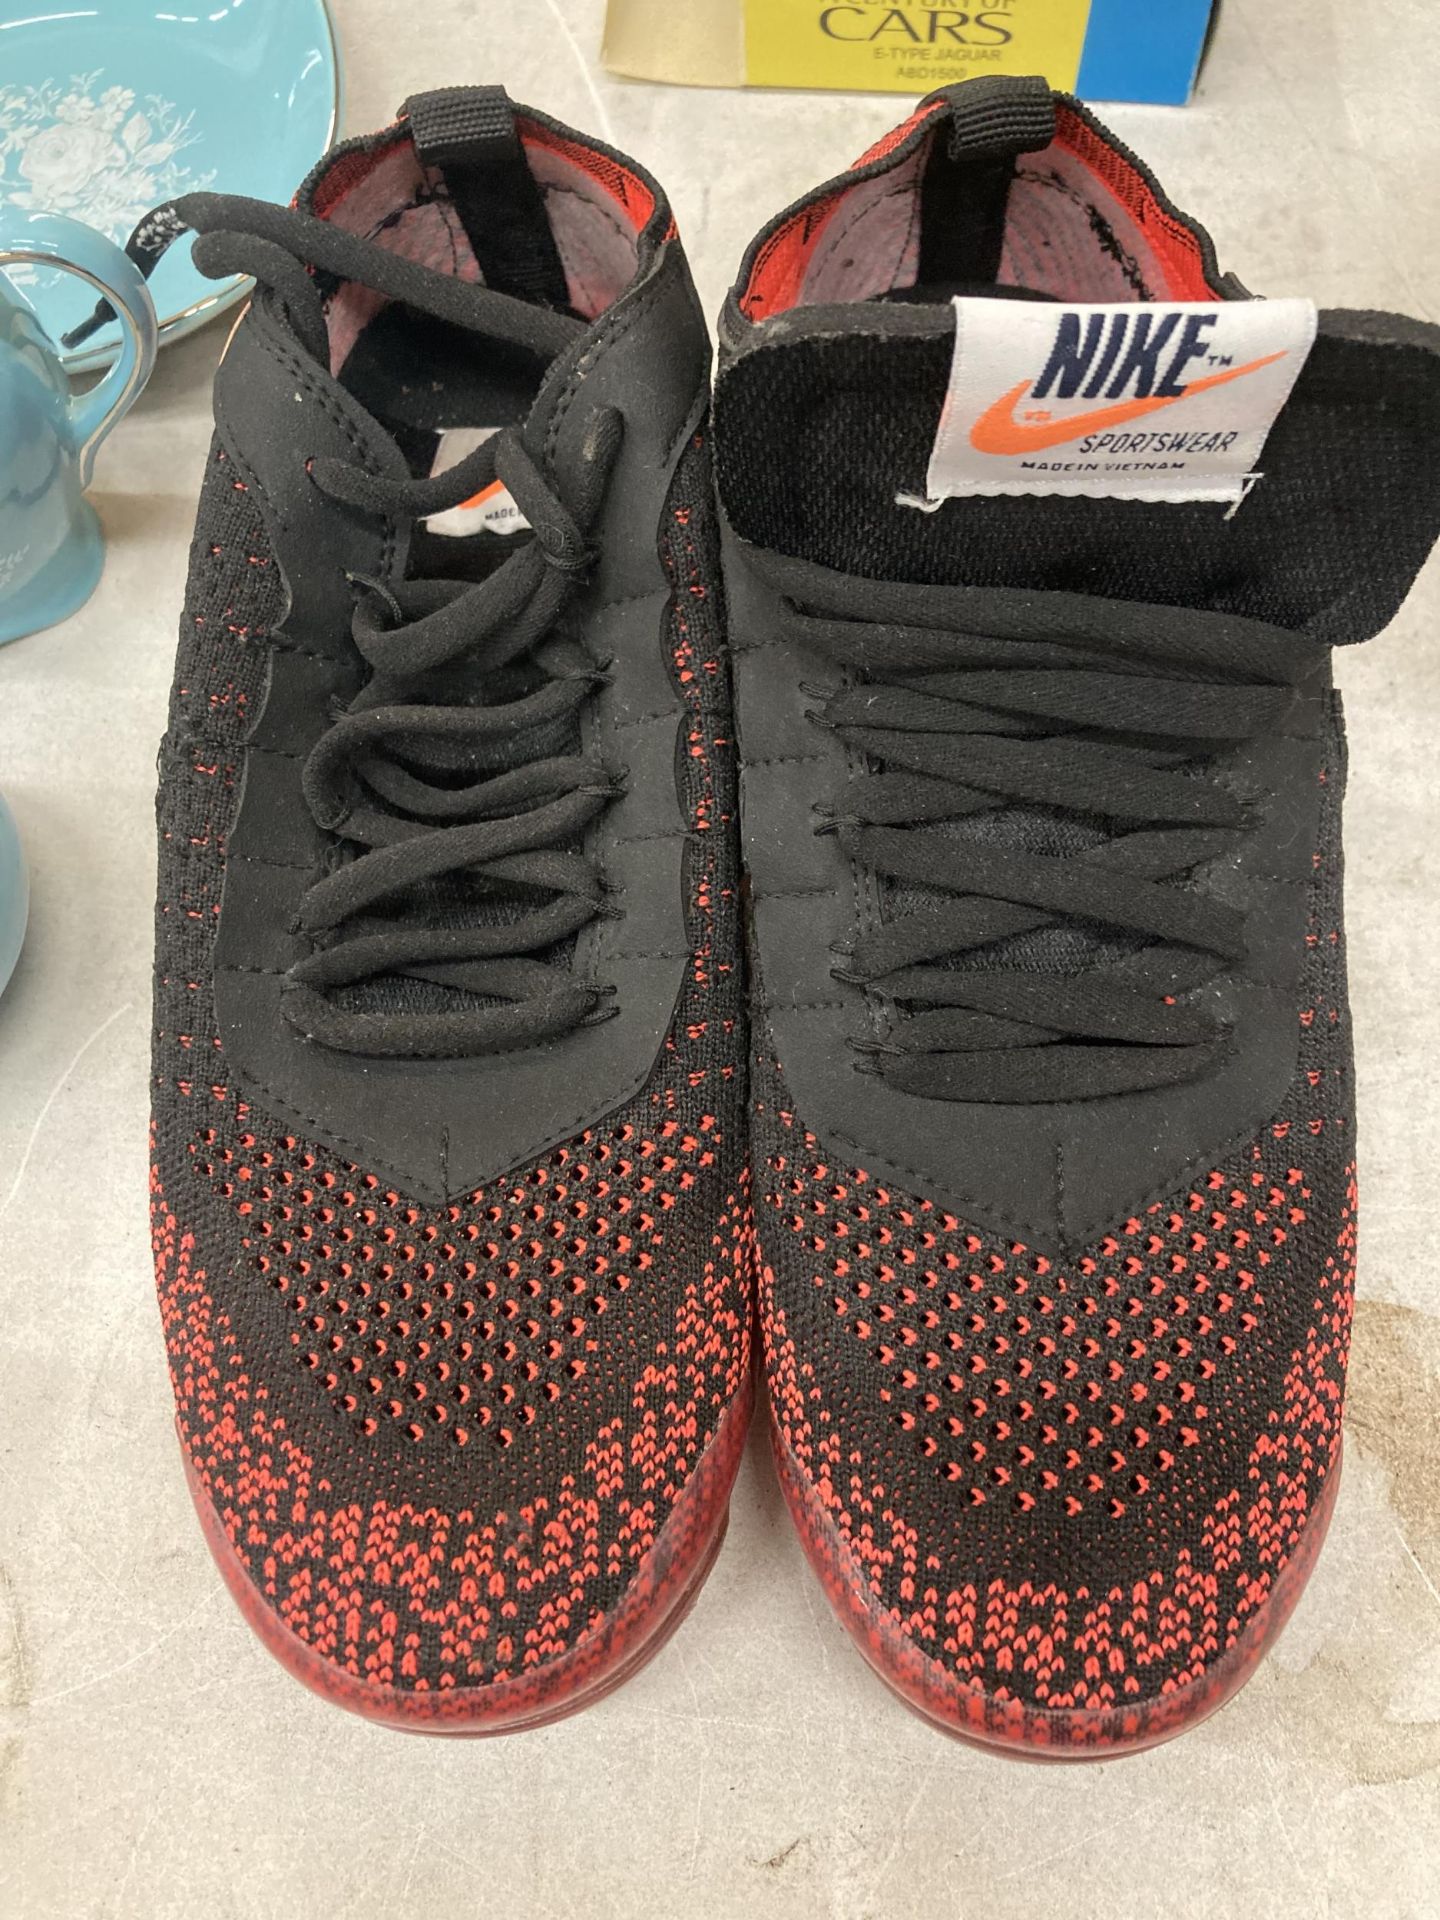 A PAIR OF OFF WHITE FOR NIKE VAPORMAX TRAINERS, UK SIZE 6